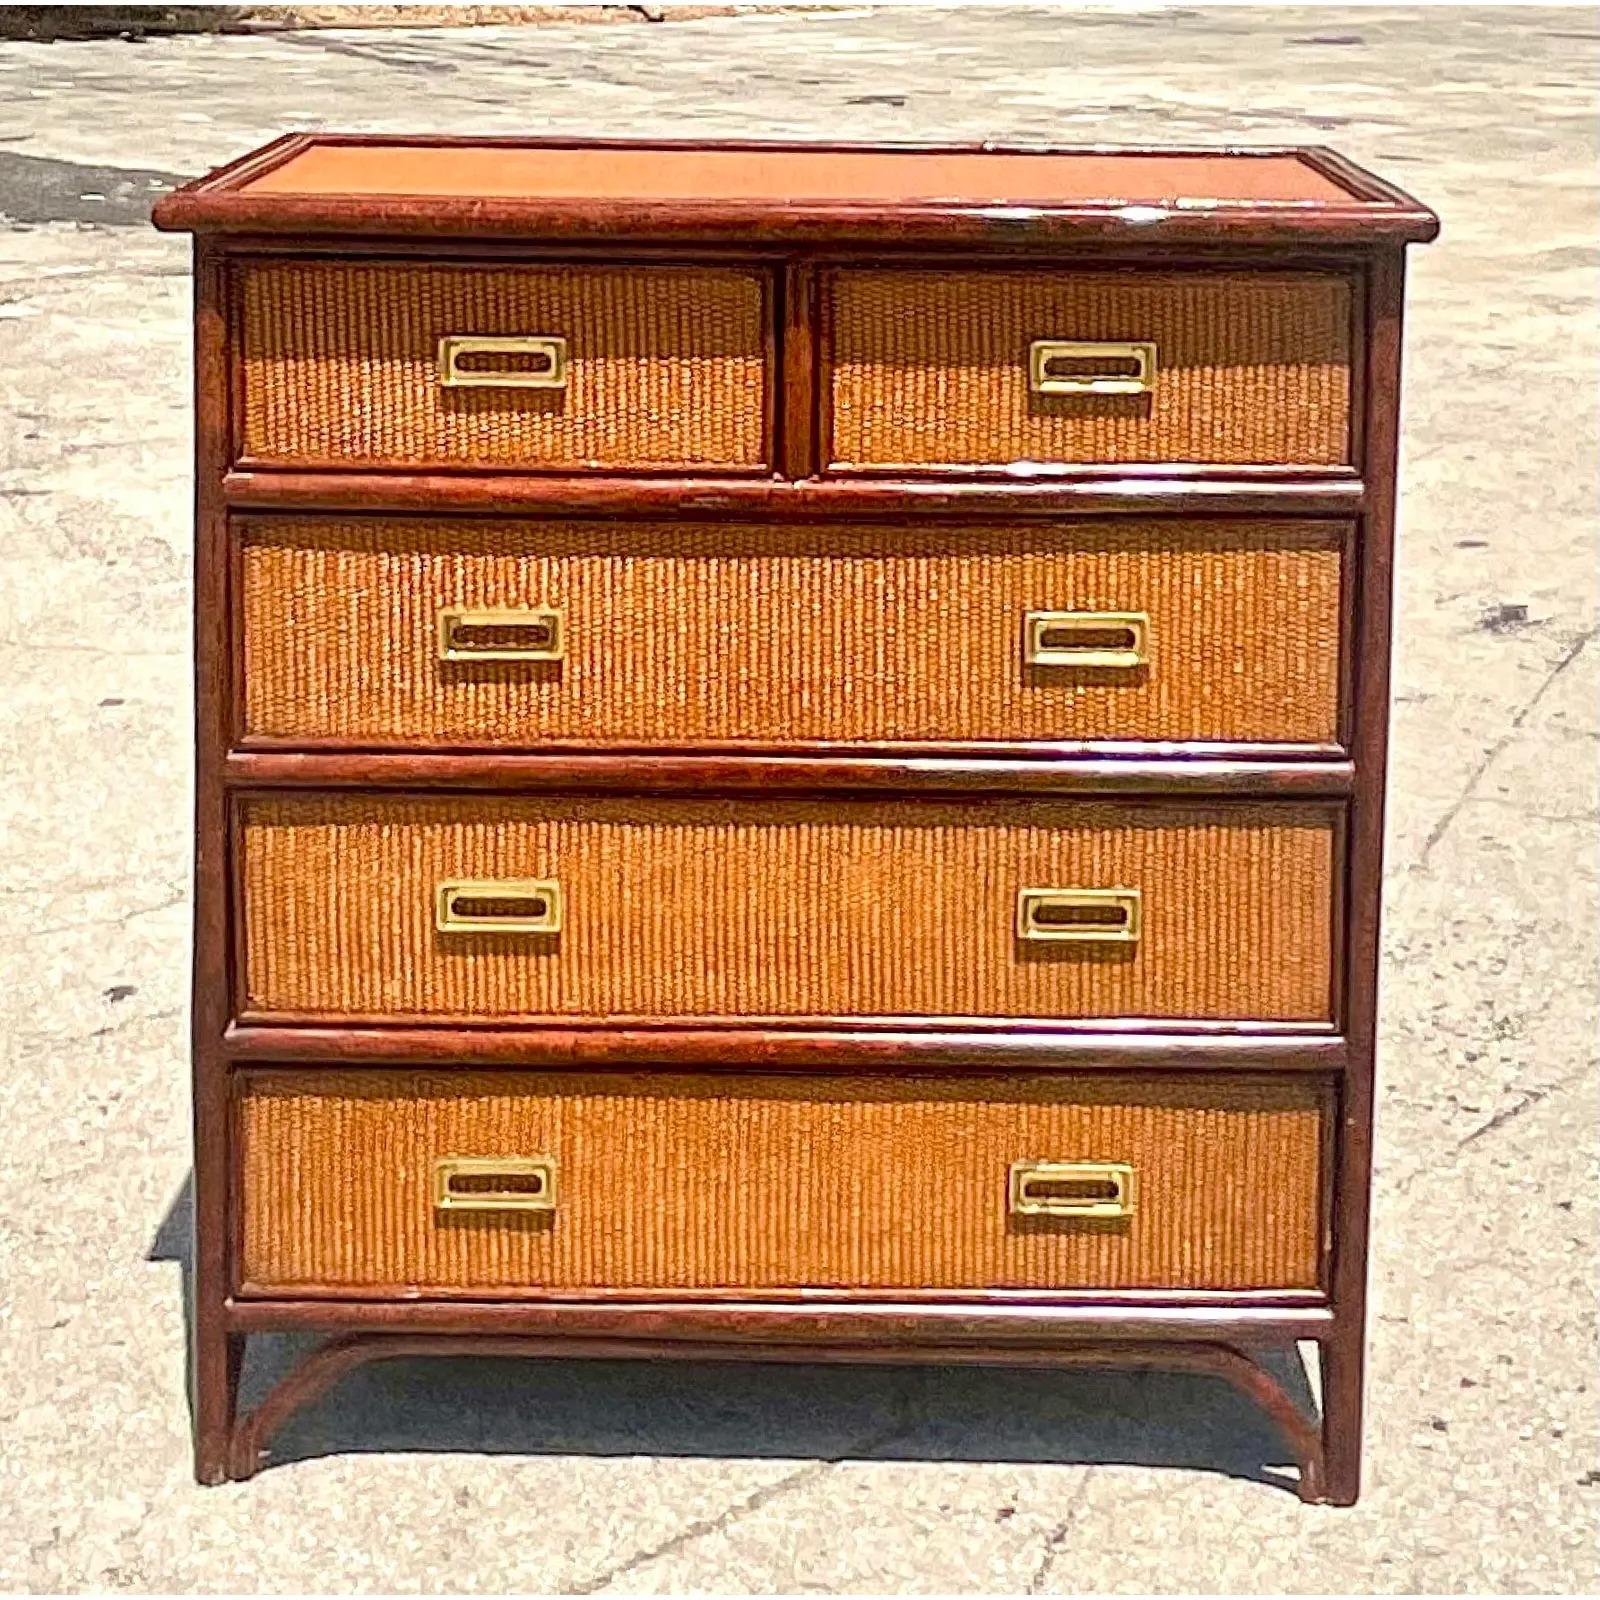 North American Vintage Coastal Tortoise Shell Chest of Drawers